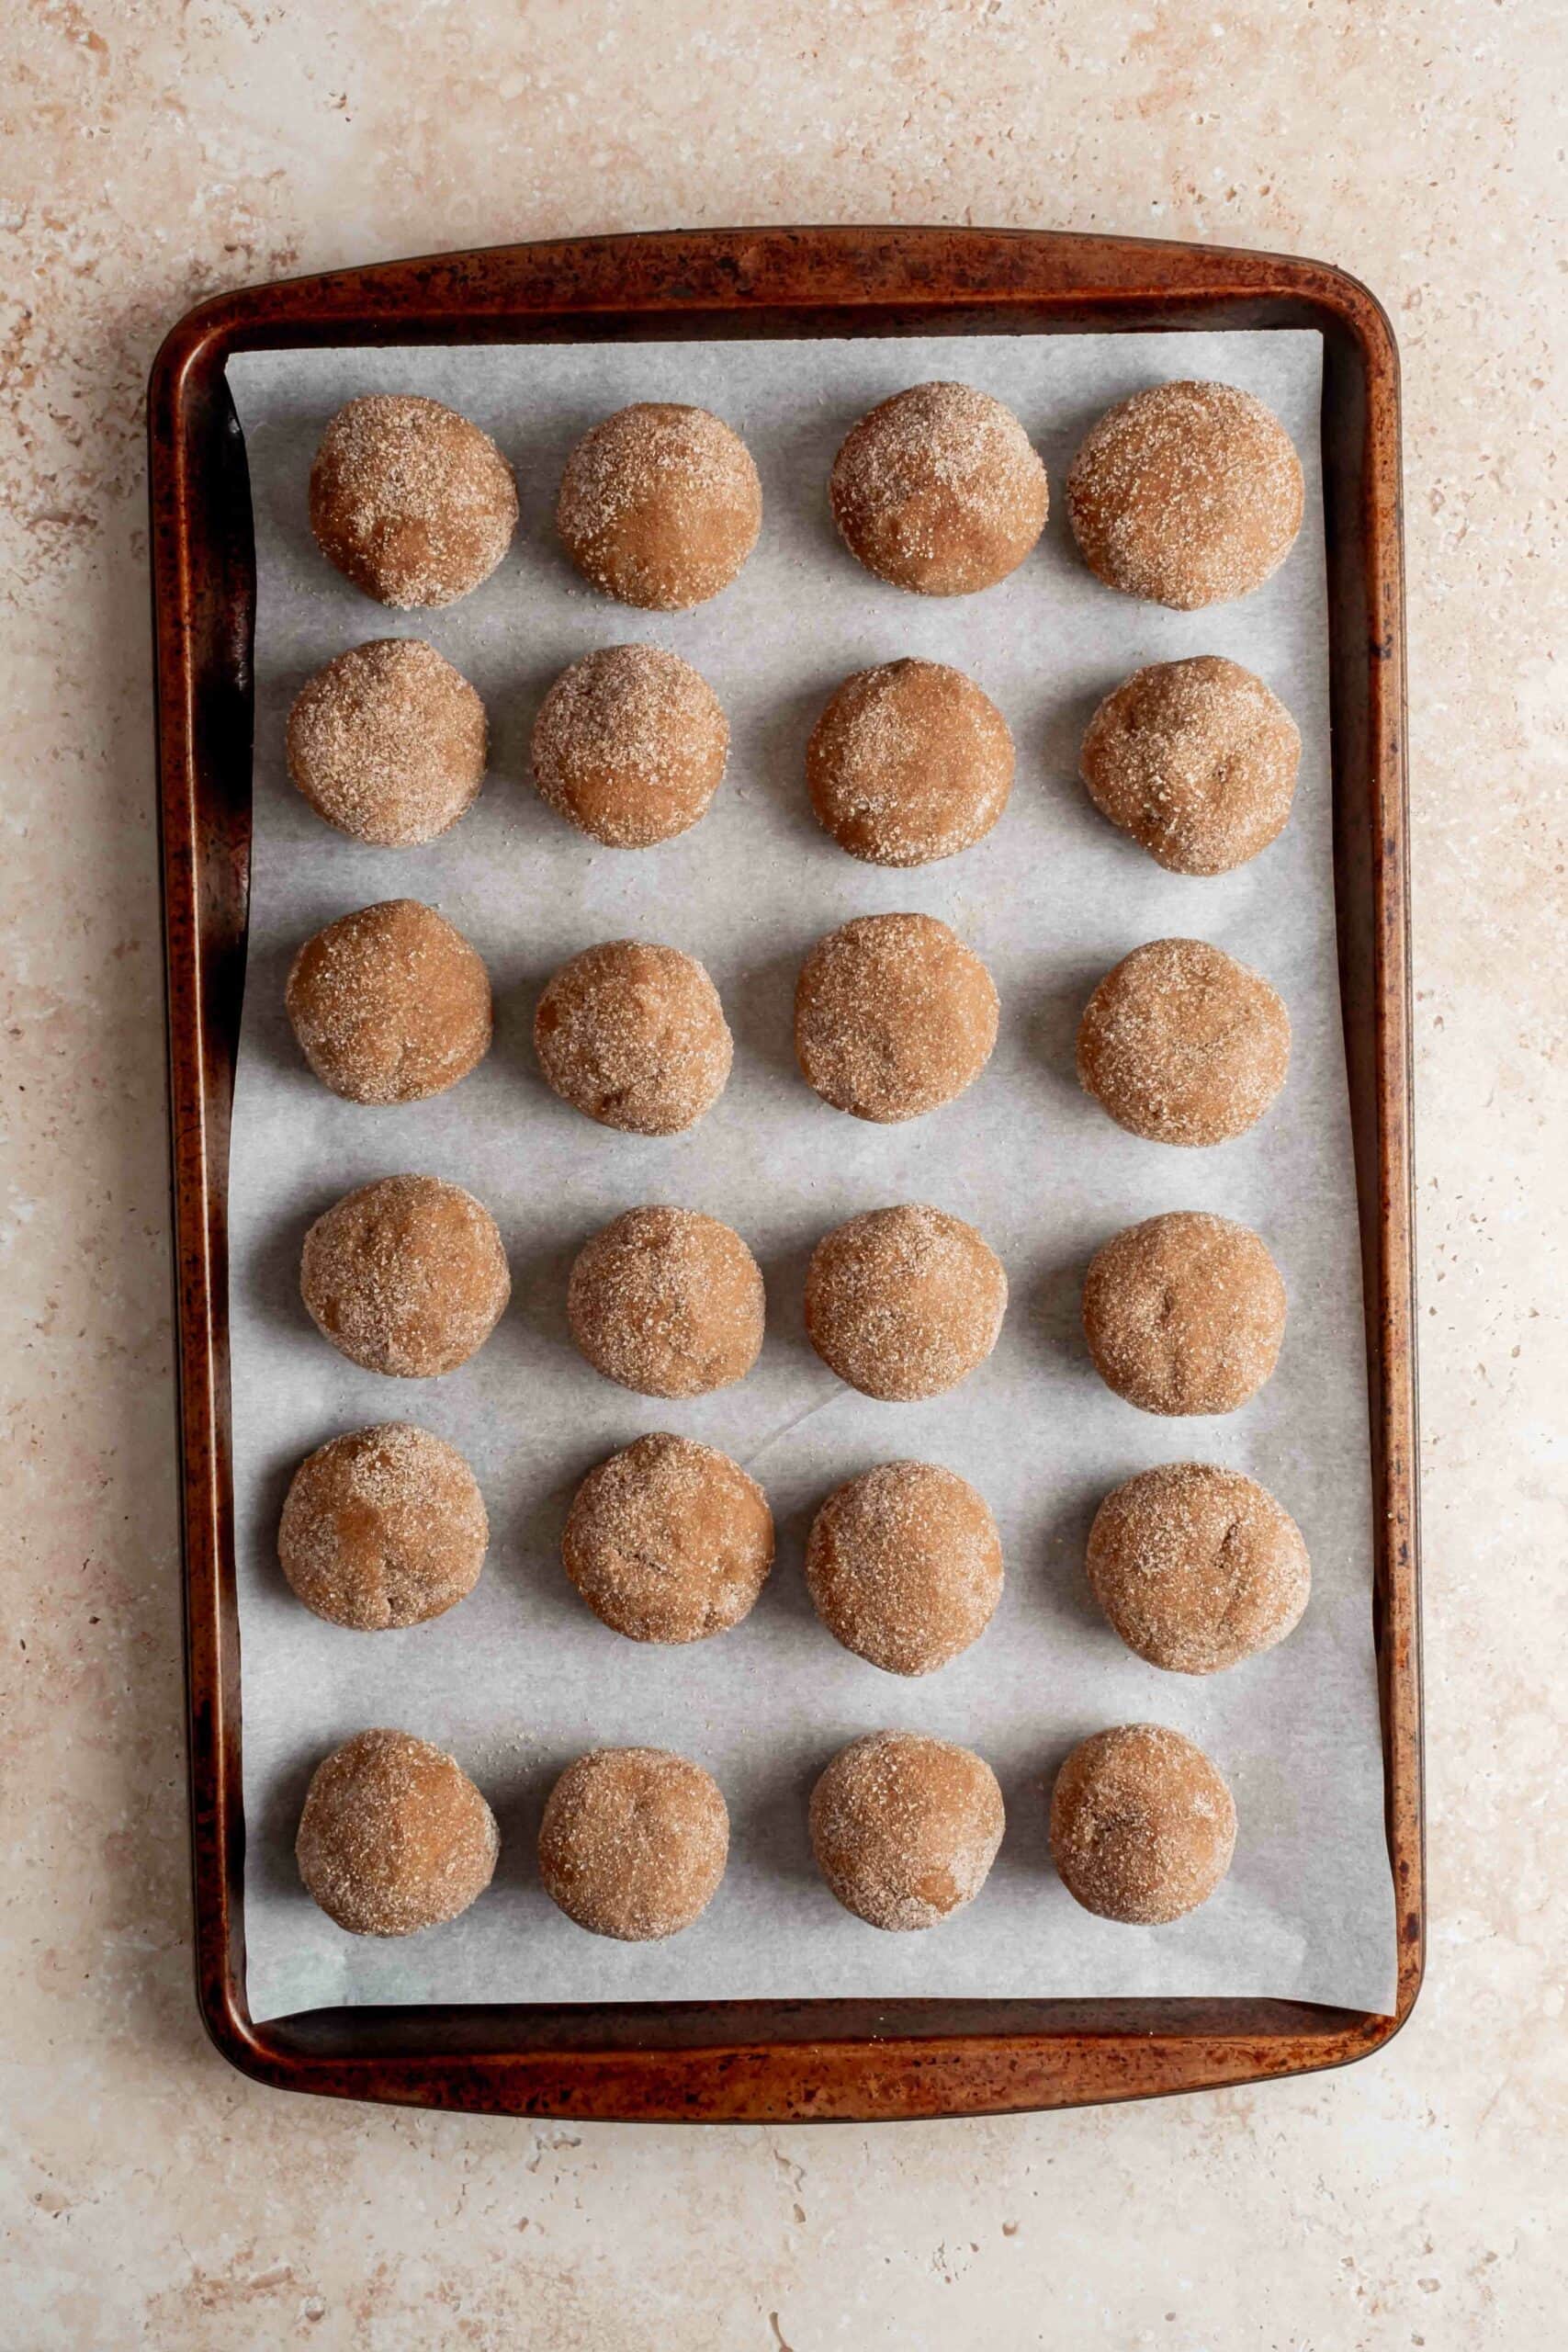 cookie dough balls rolled in cinnamon sugar and ready to bake